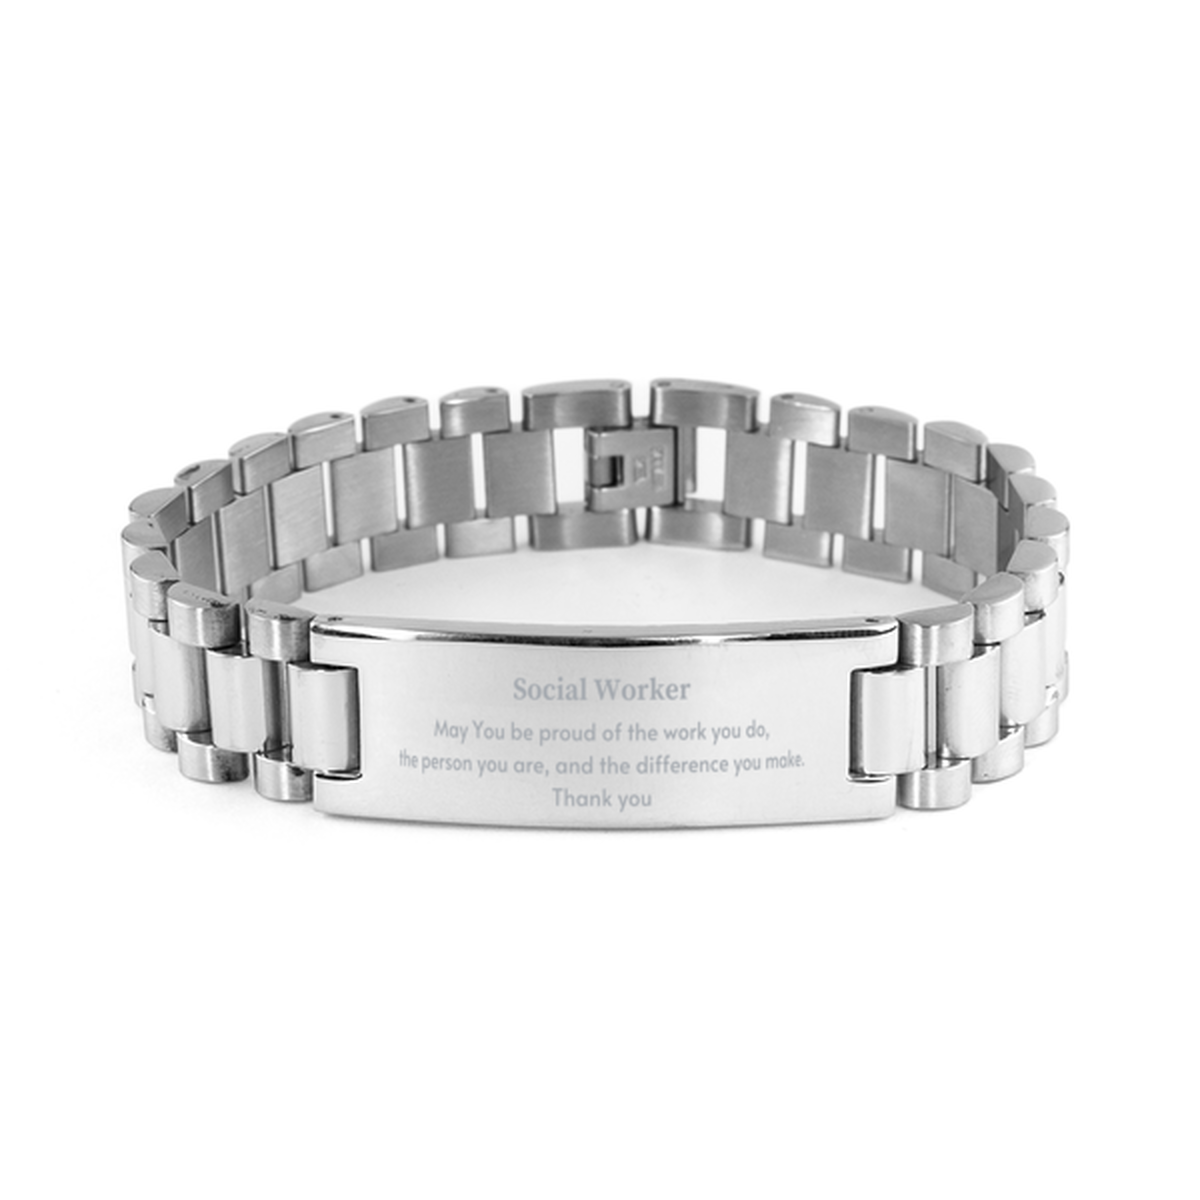 Heartwarming Ladder Stainless Steel Bracelet Retirement Coworkers Gifts for Social Worker, Social Worker May You be proud of the work you do, the person you are Gifts for Boss Men Women Friends